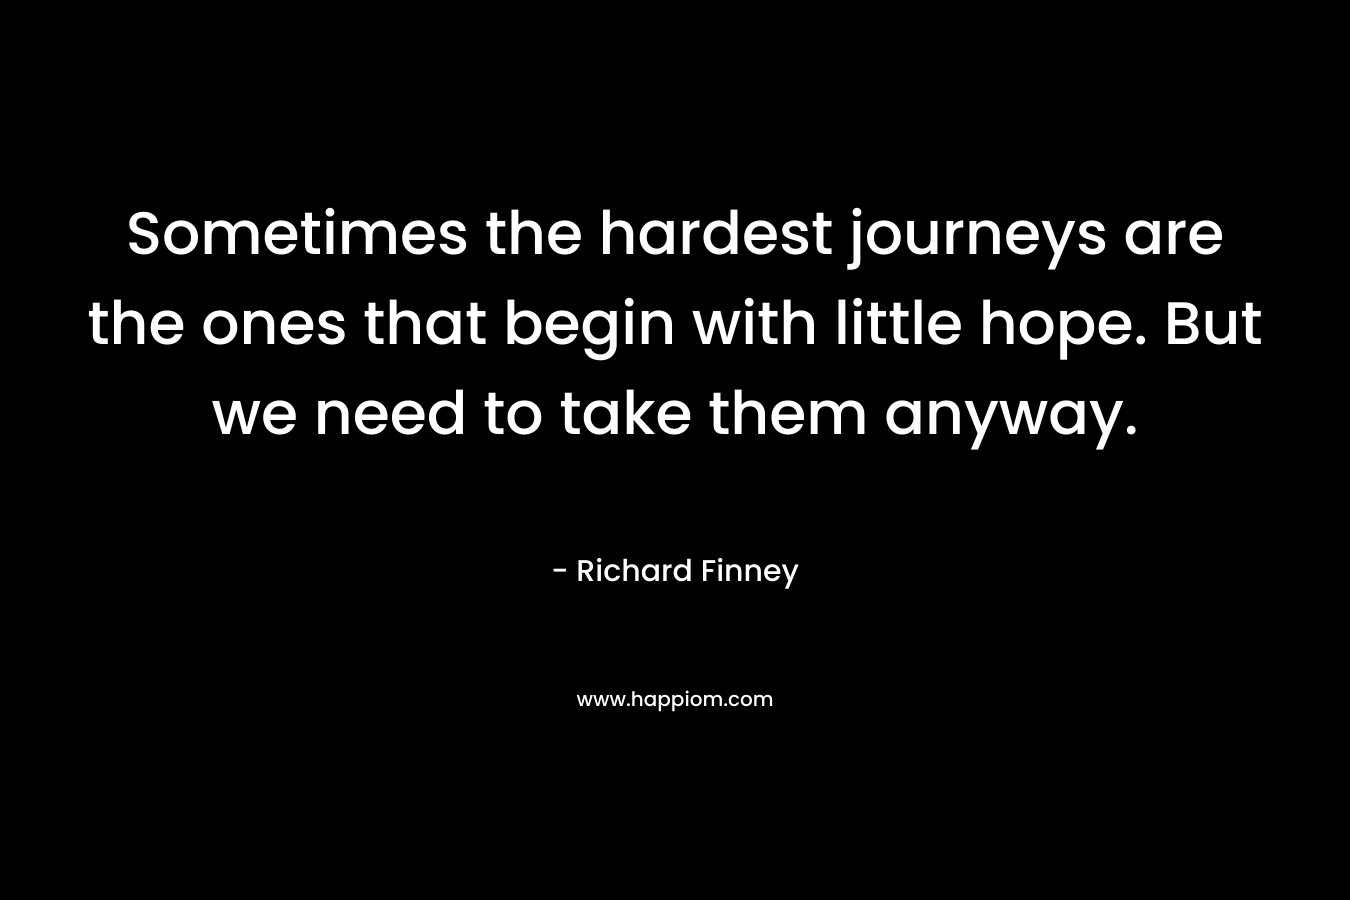 Sometimes the hardest journeys are the ones that begin with little hope. But we need to take them anyway.